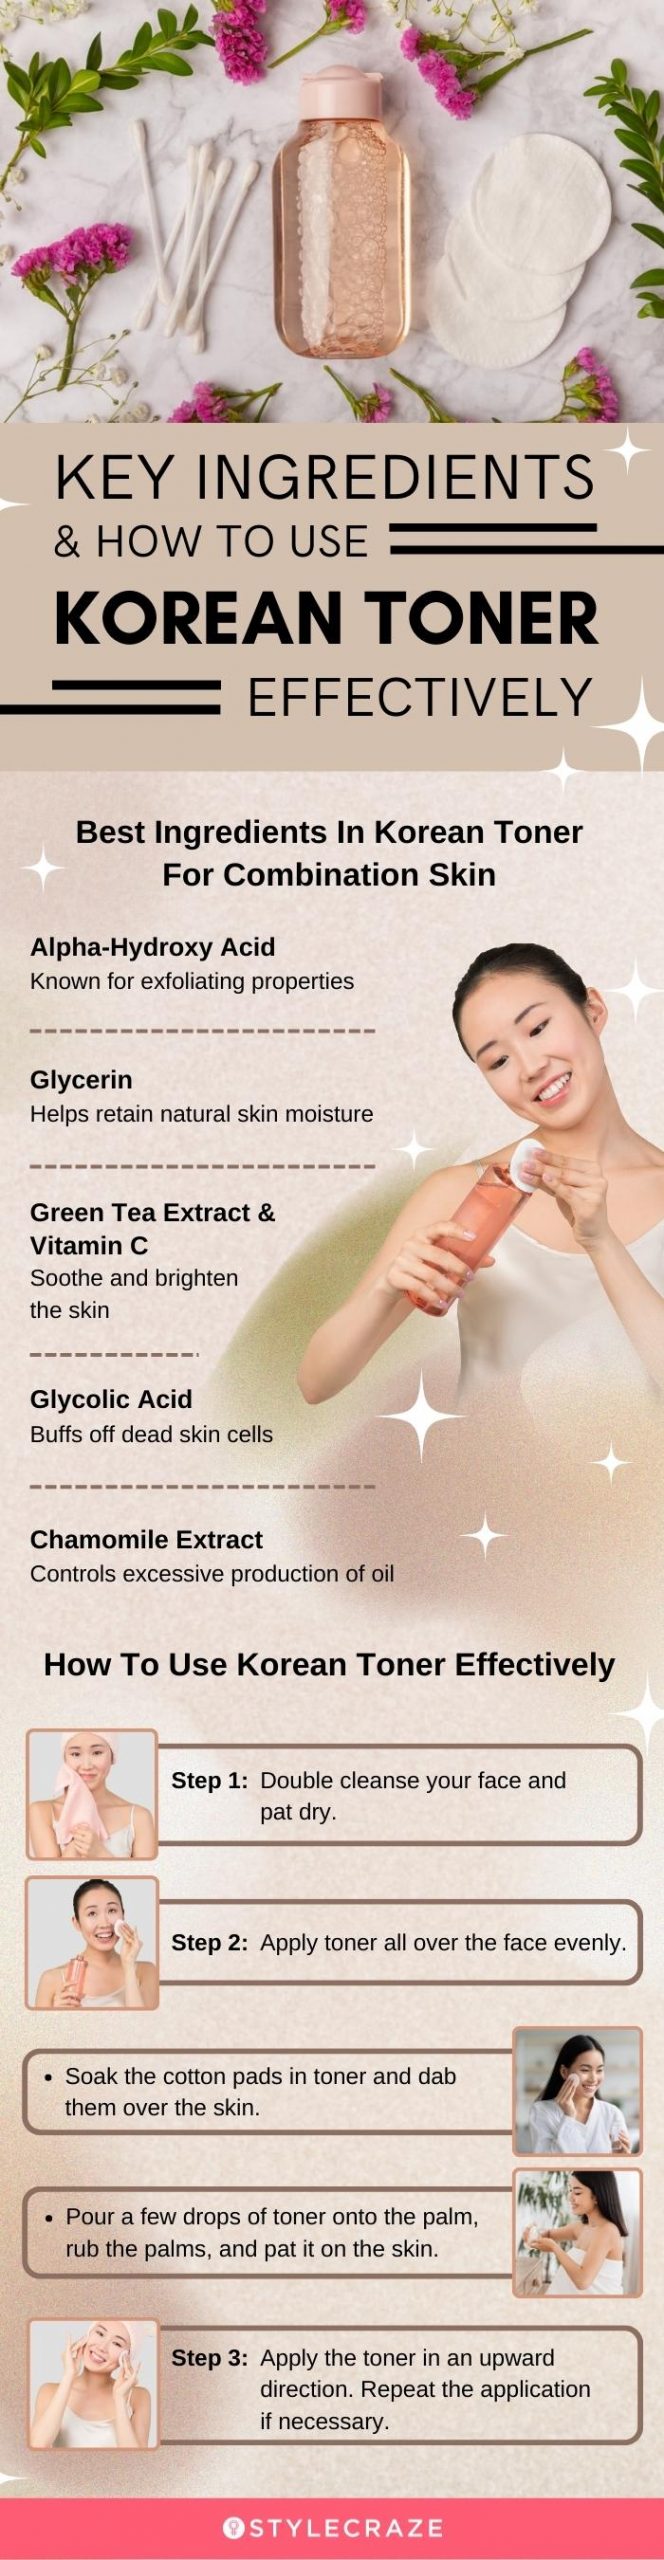 Key Ingredients & How To Use Korean Toner Effectively [infographic]